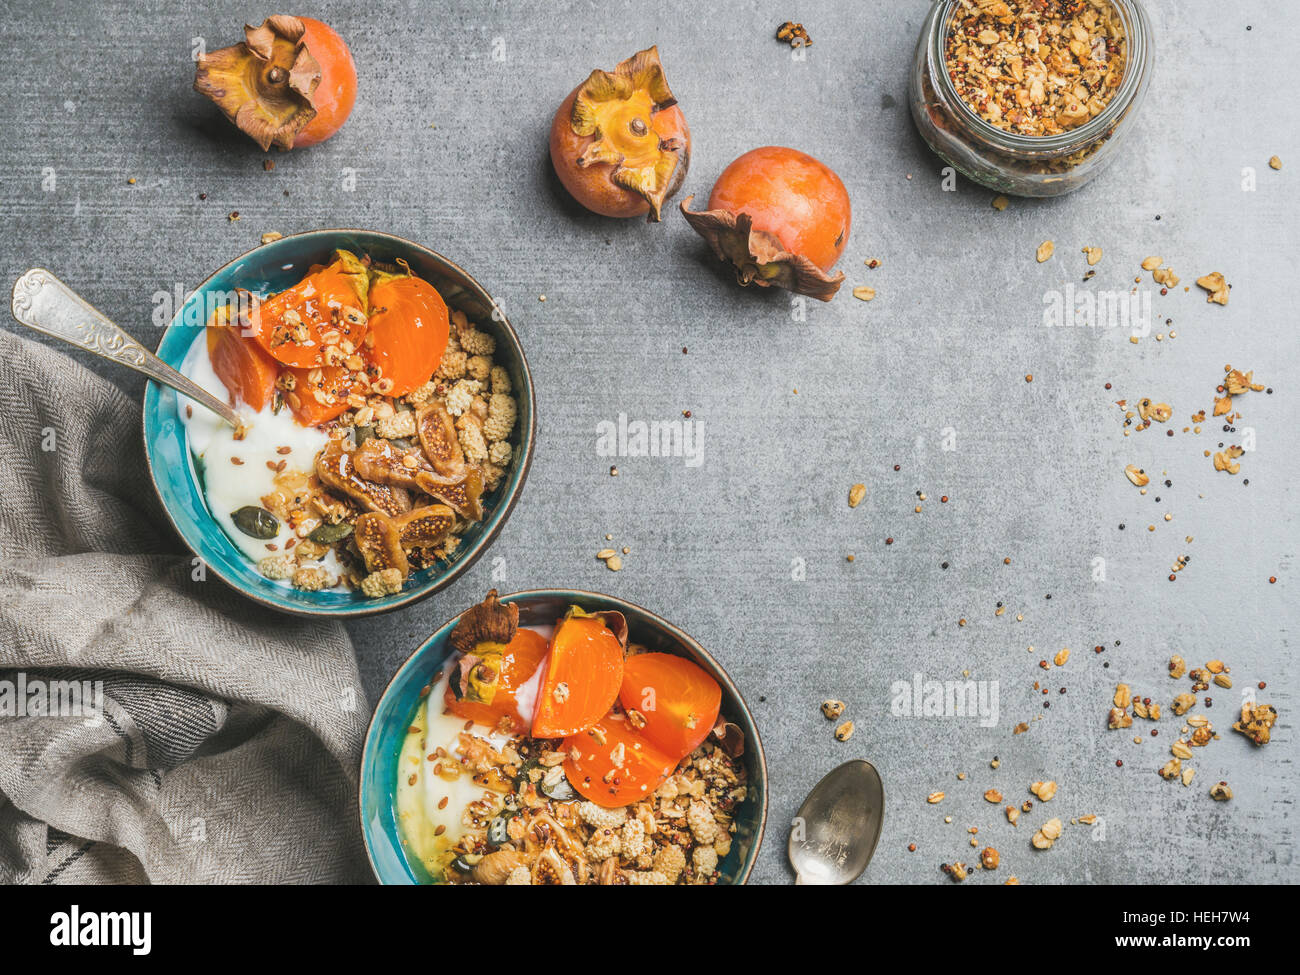 Healthy vegetarian breakfast. Oatmeal, quinoa granola with yogurt, dried fruit, seeds, honey, fresh persimmon in bowls over grey background, top view, Stock Photo